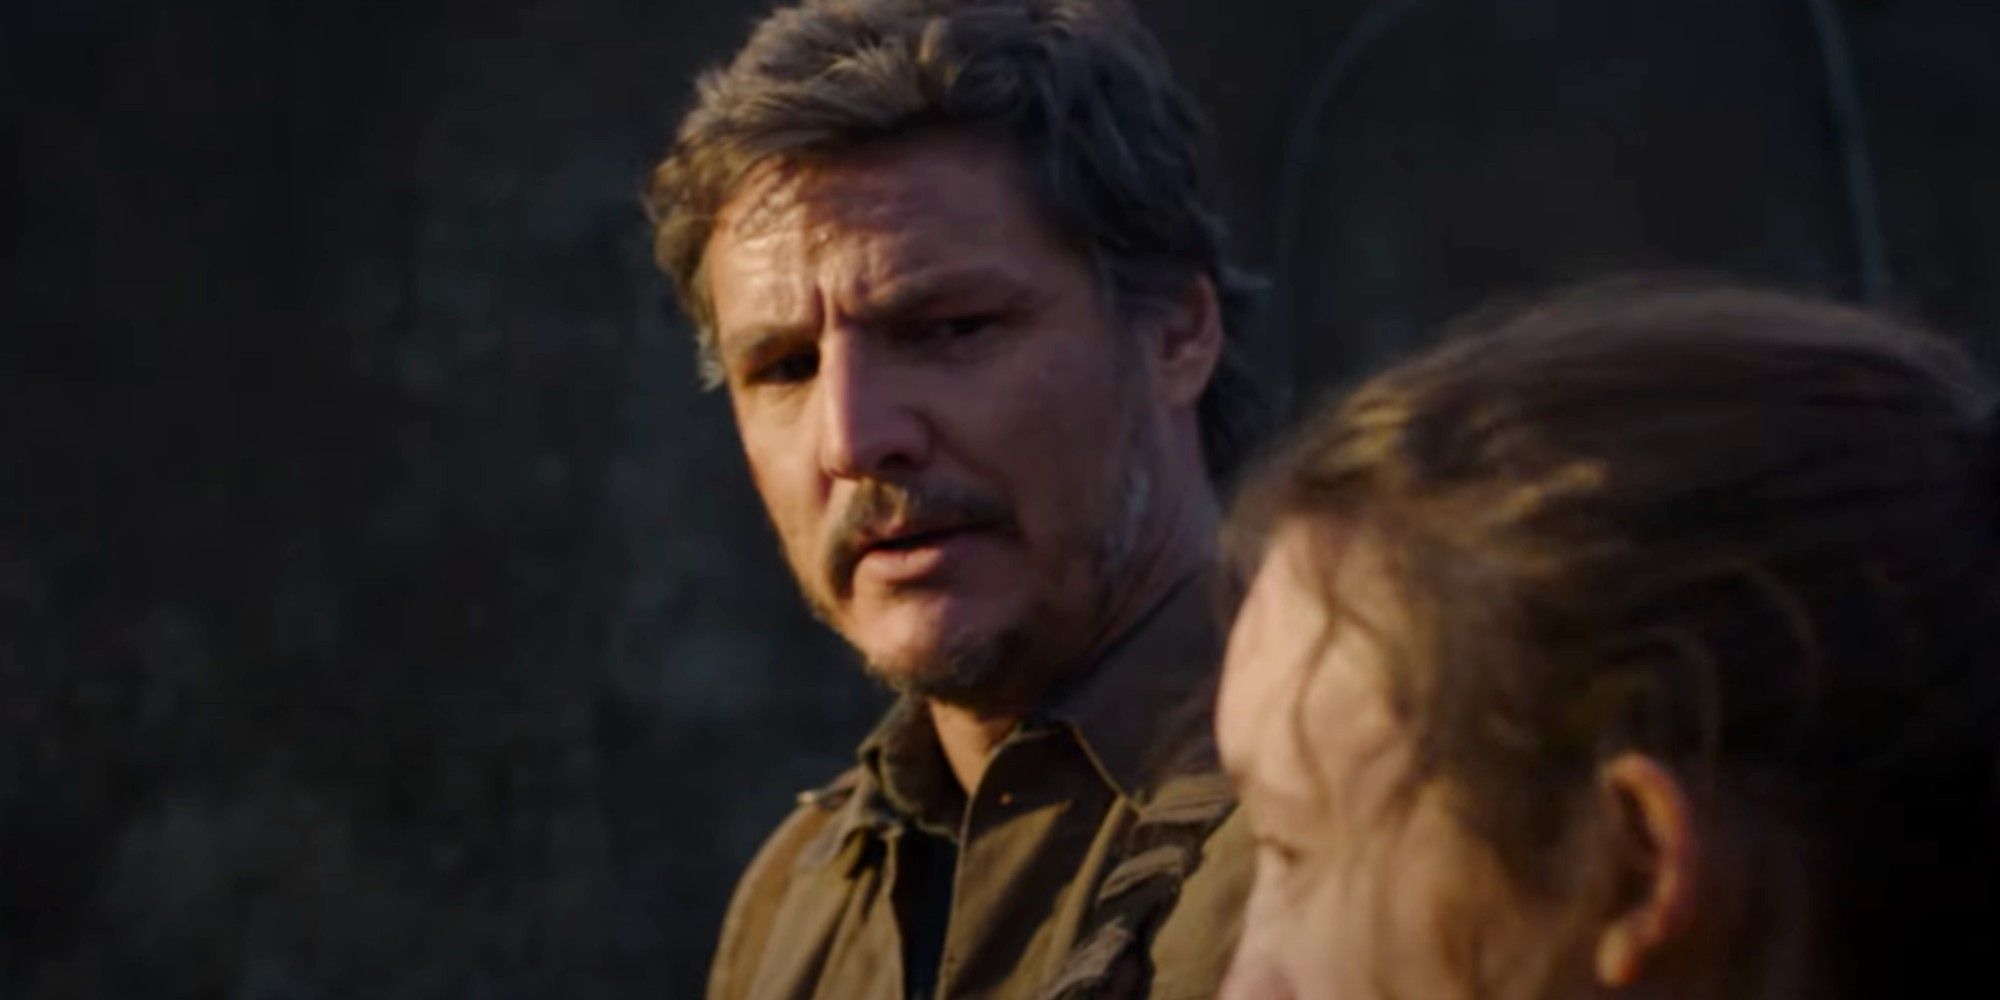 See Pedro Pascal and Bella Ramsey as Joel & Ellie in 'The Last of Us'  (PHOTO)